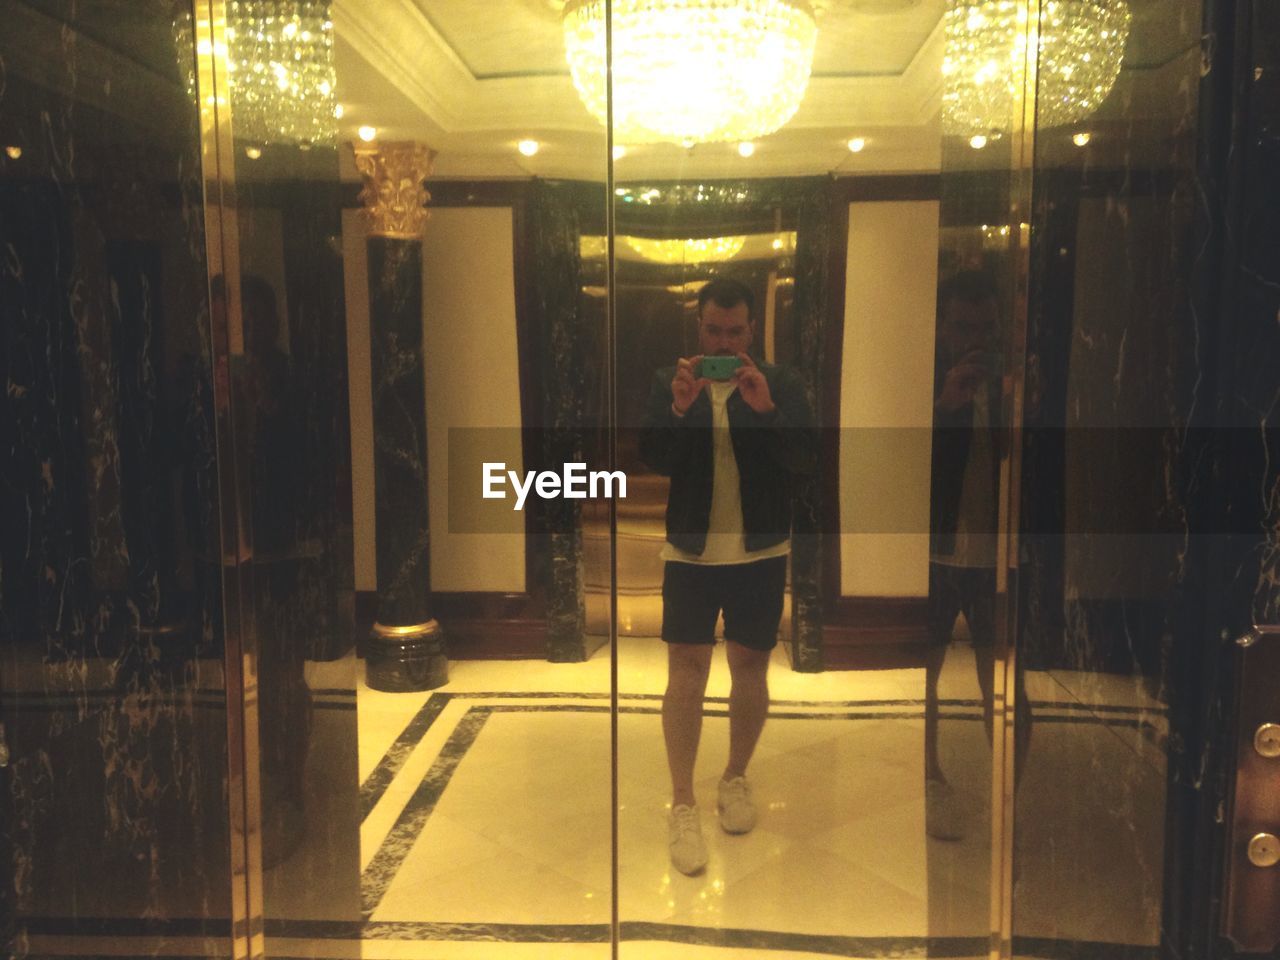 Reflection of man clicking photograph on elevator door